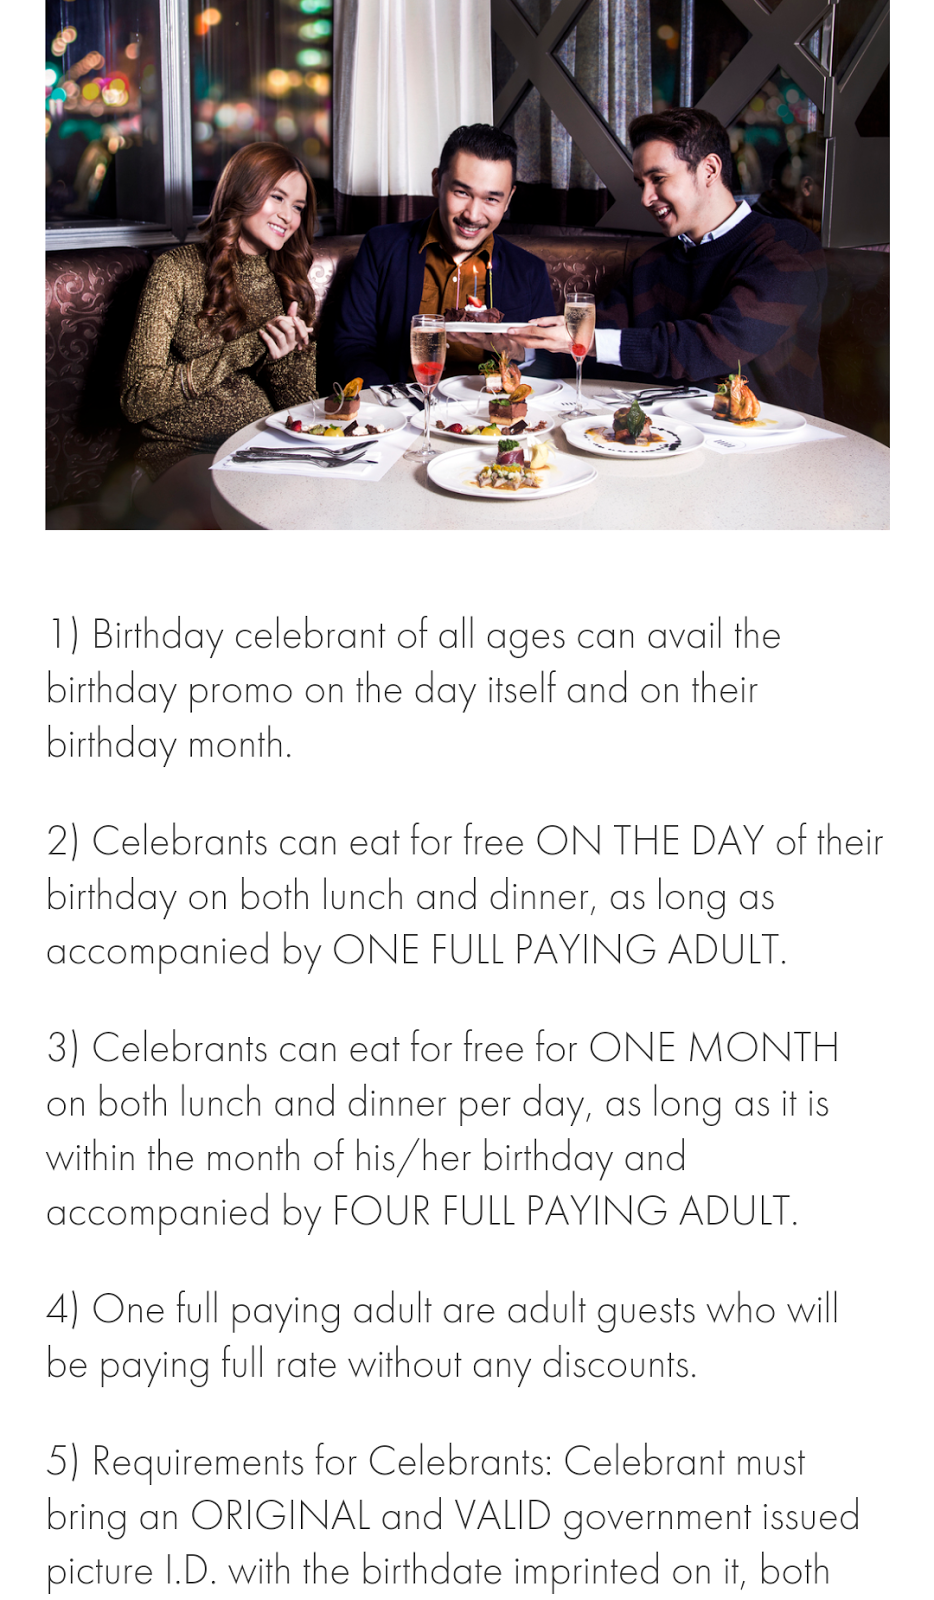 Birthday Happy? Here's Where You Can Dine for FREE!!!